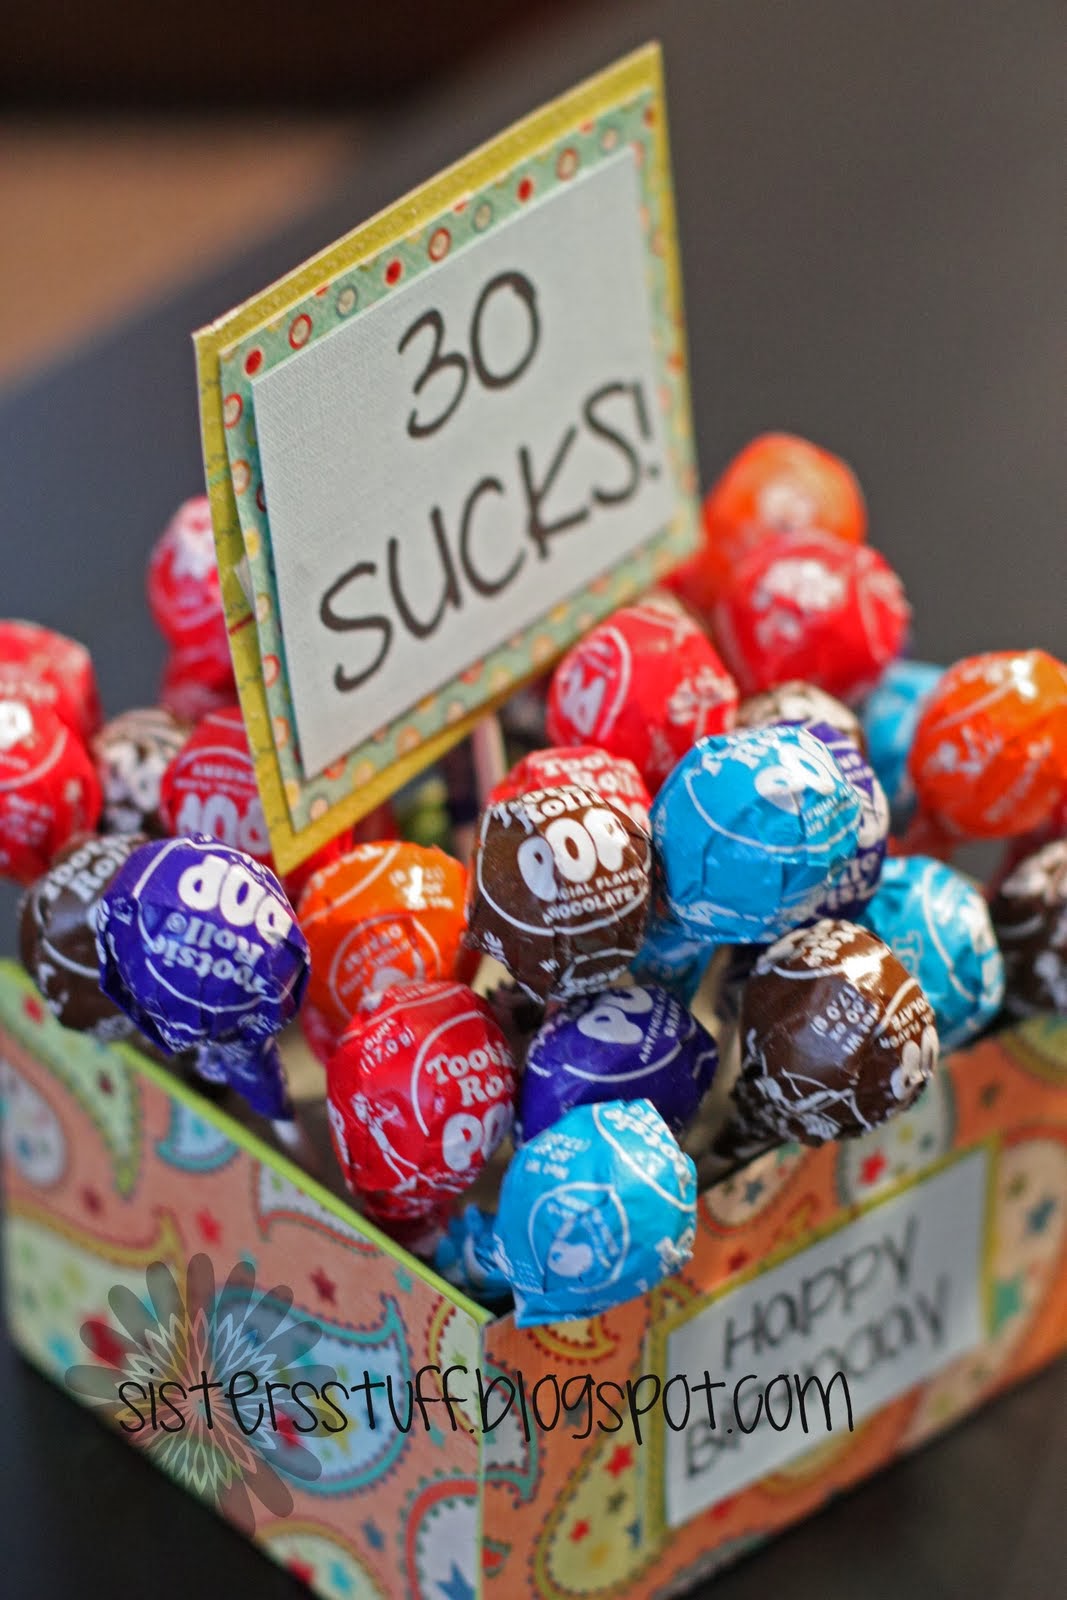 30 sucks lollipops Celebrate In Style With These 50 DIY 30th Birthday Ideas!